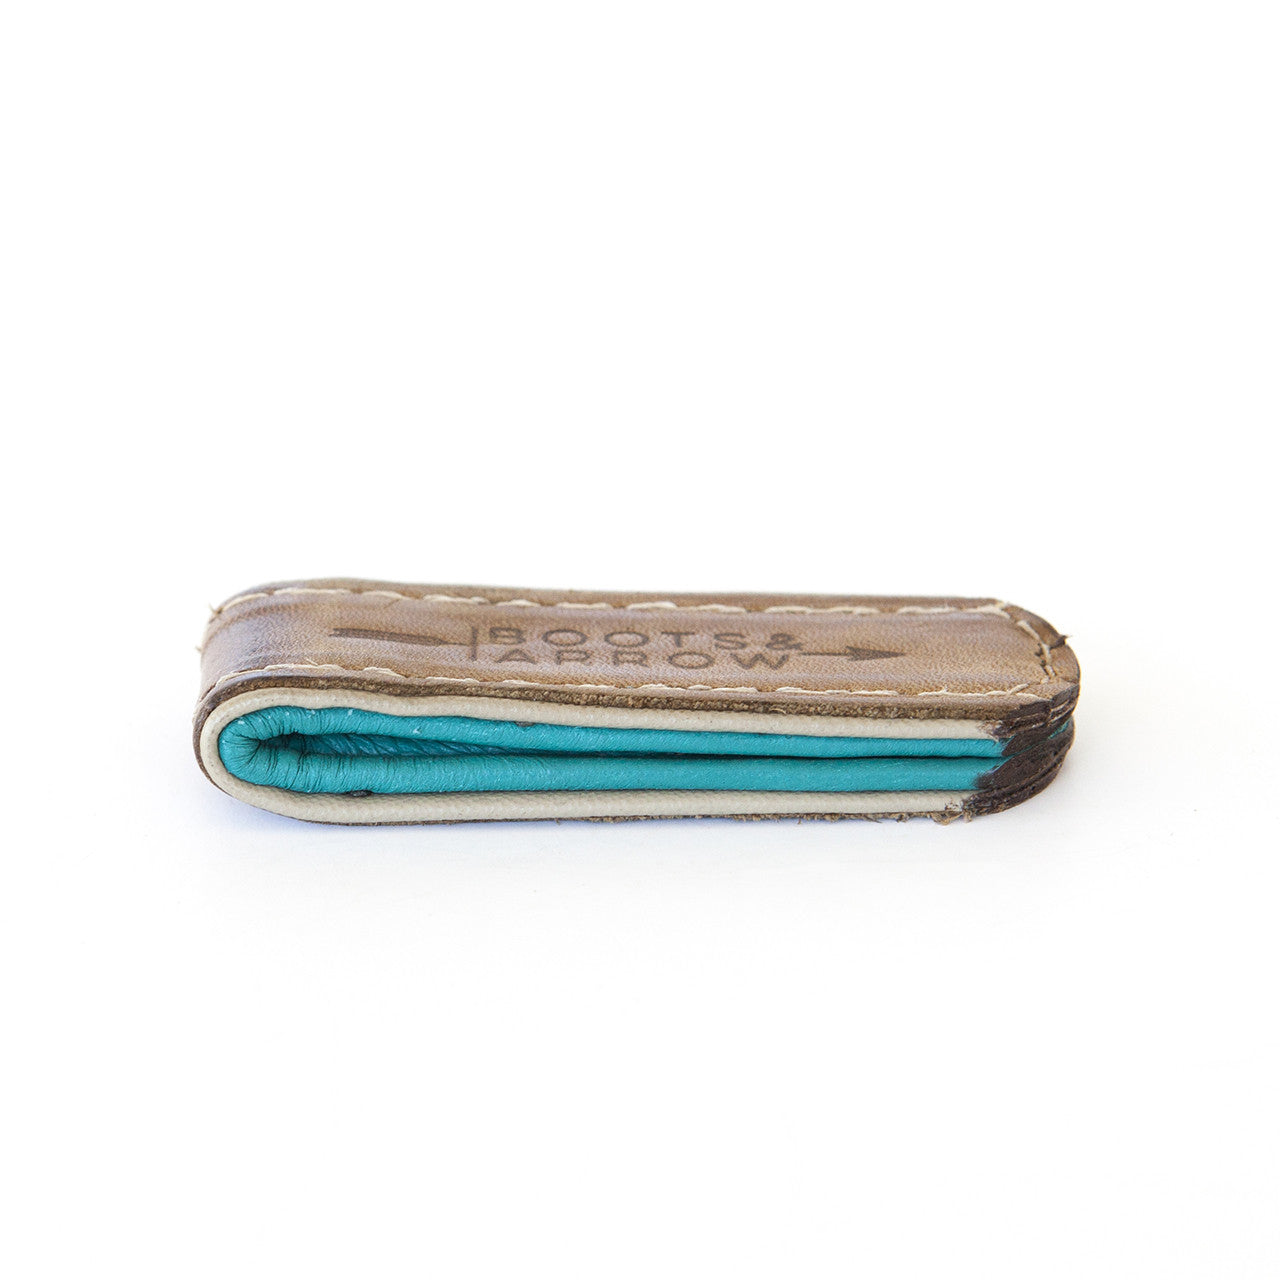 Brown + Turquoise Bootstrap Money Clip